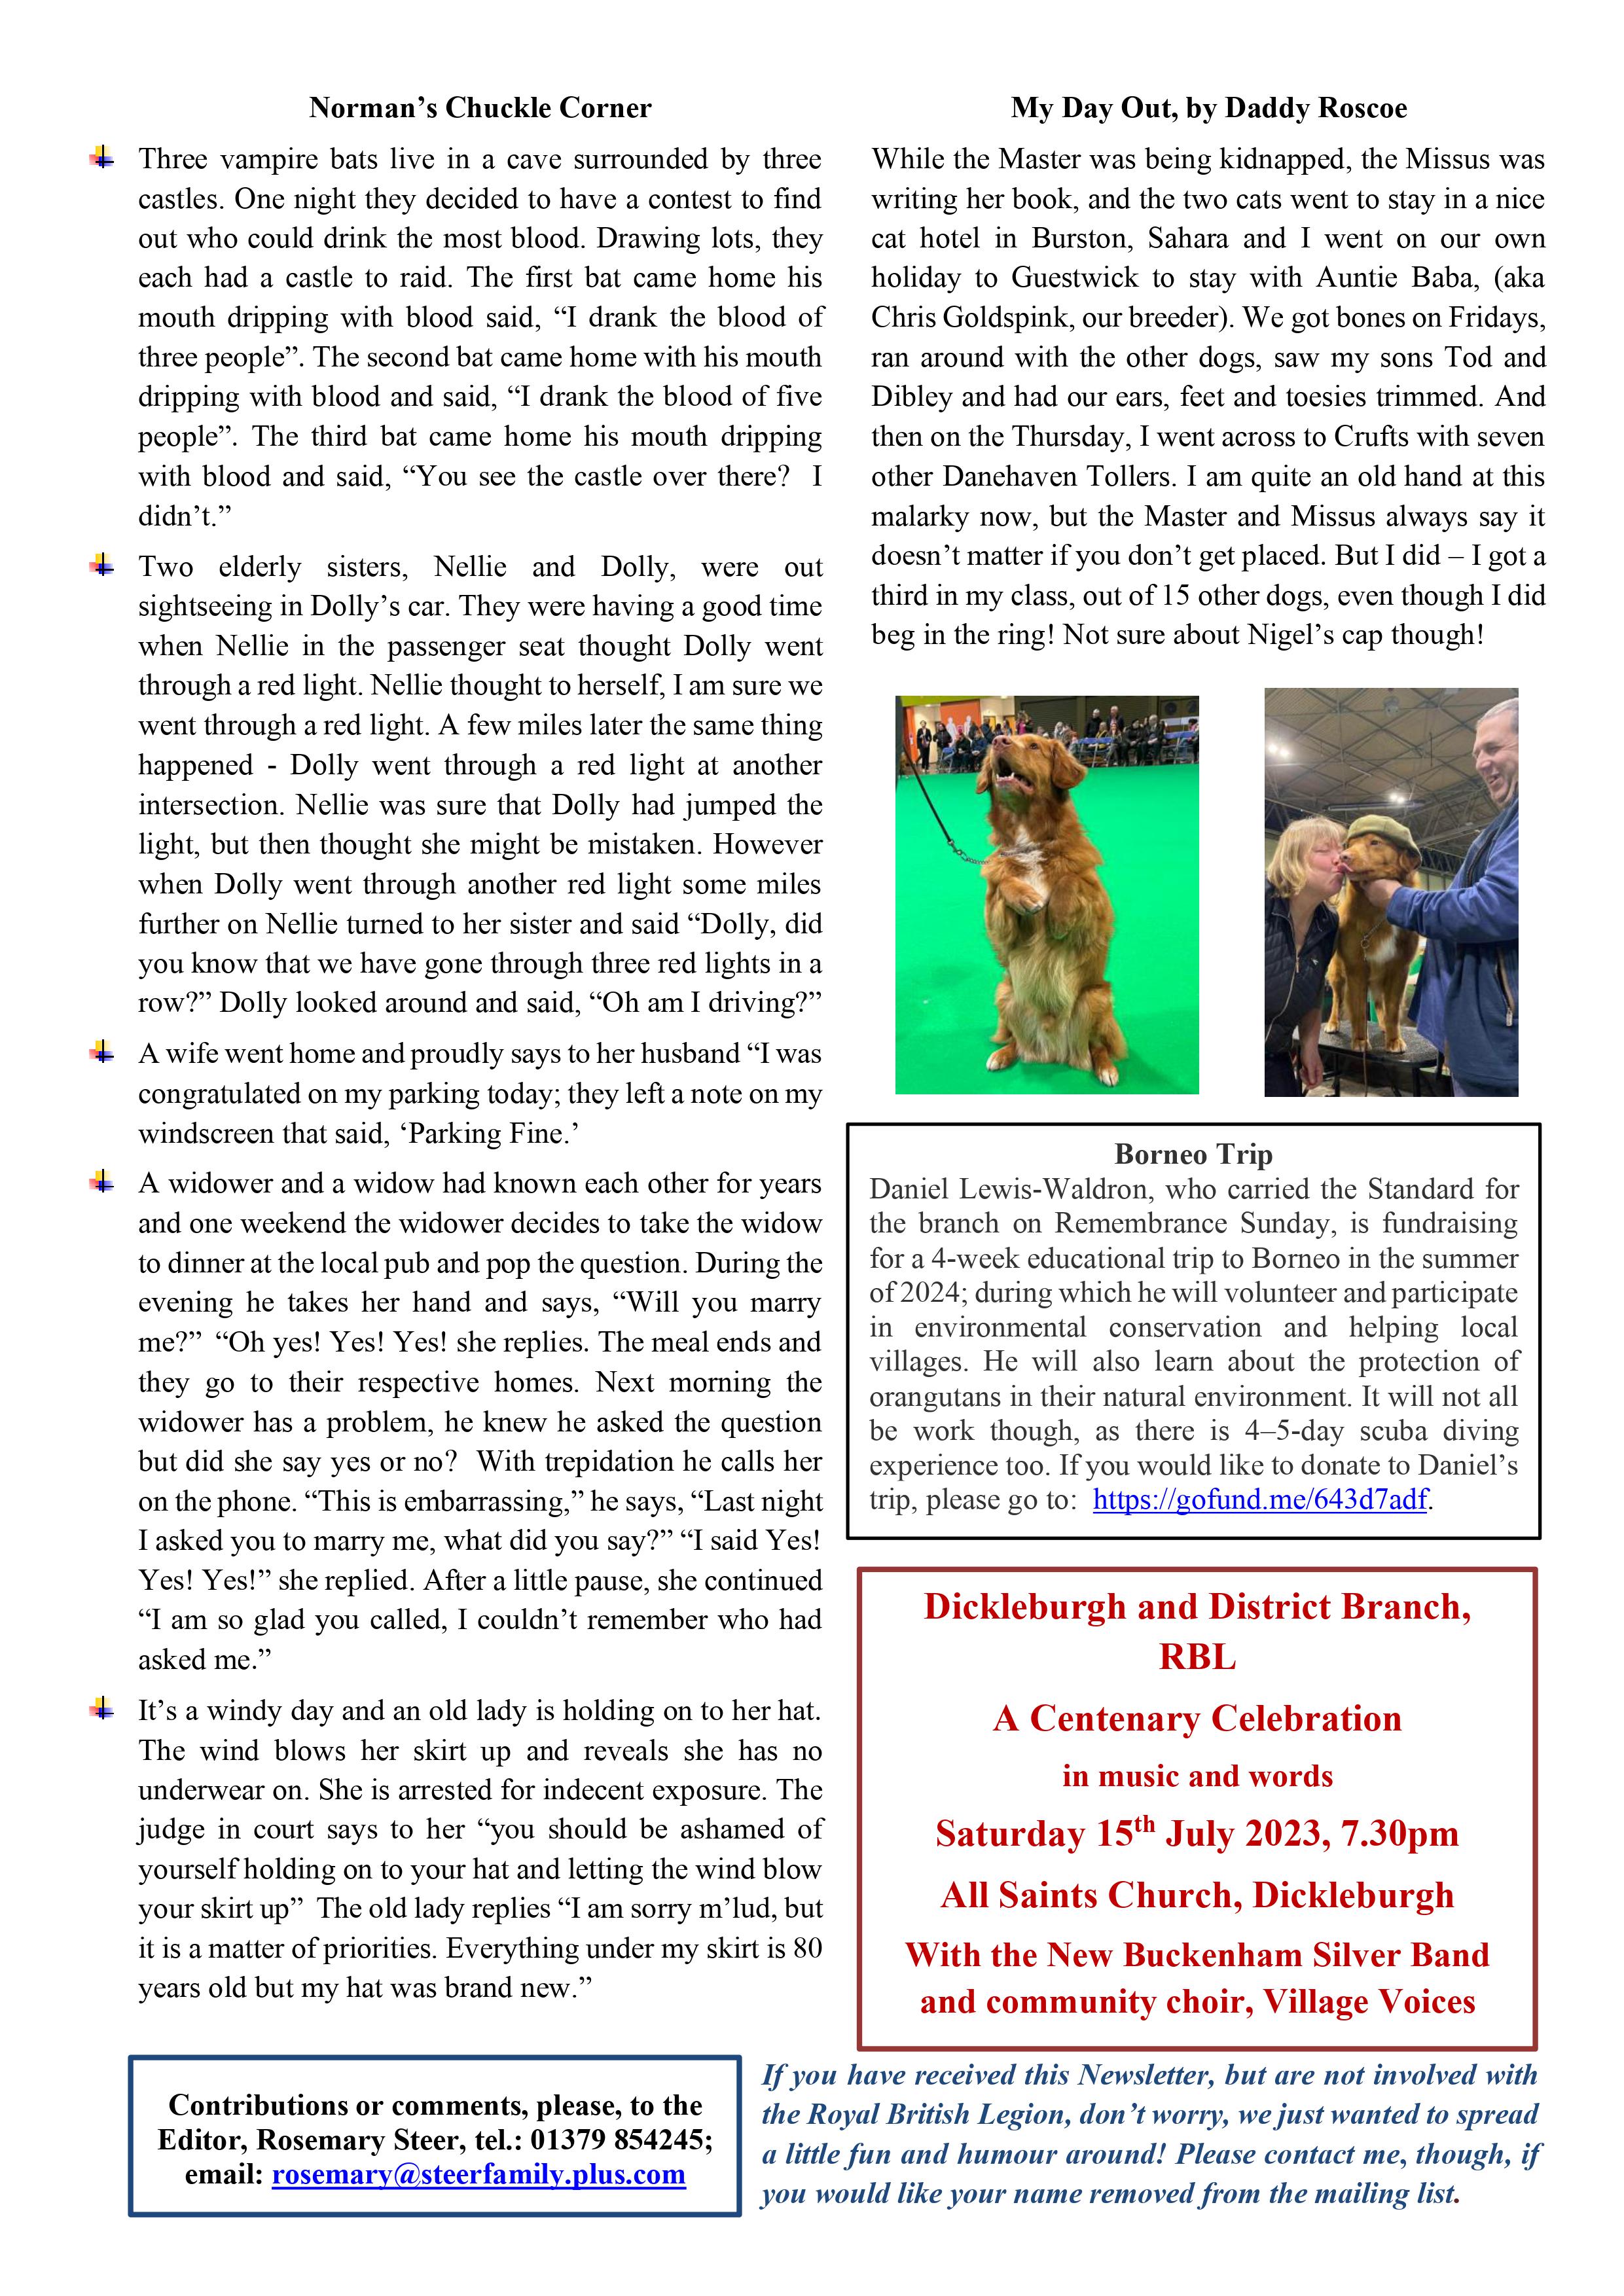 RBL - Dickleburgh & District Branch March 2023 Newsletter Page 4